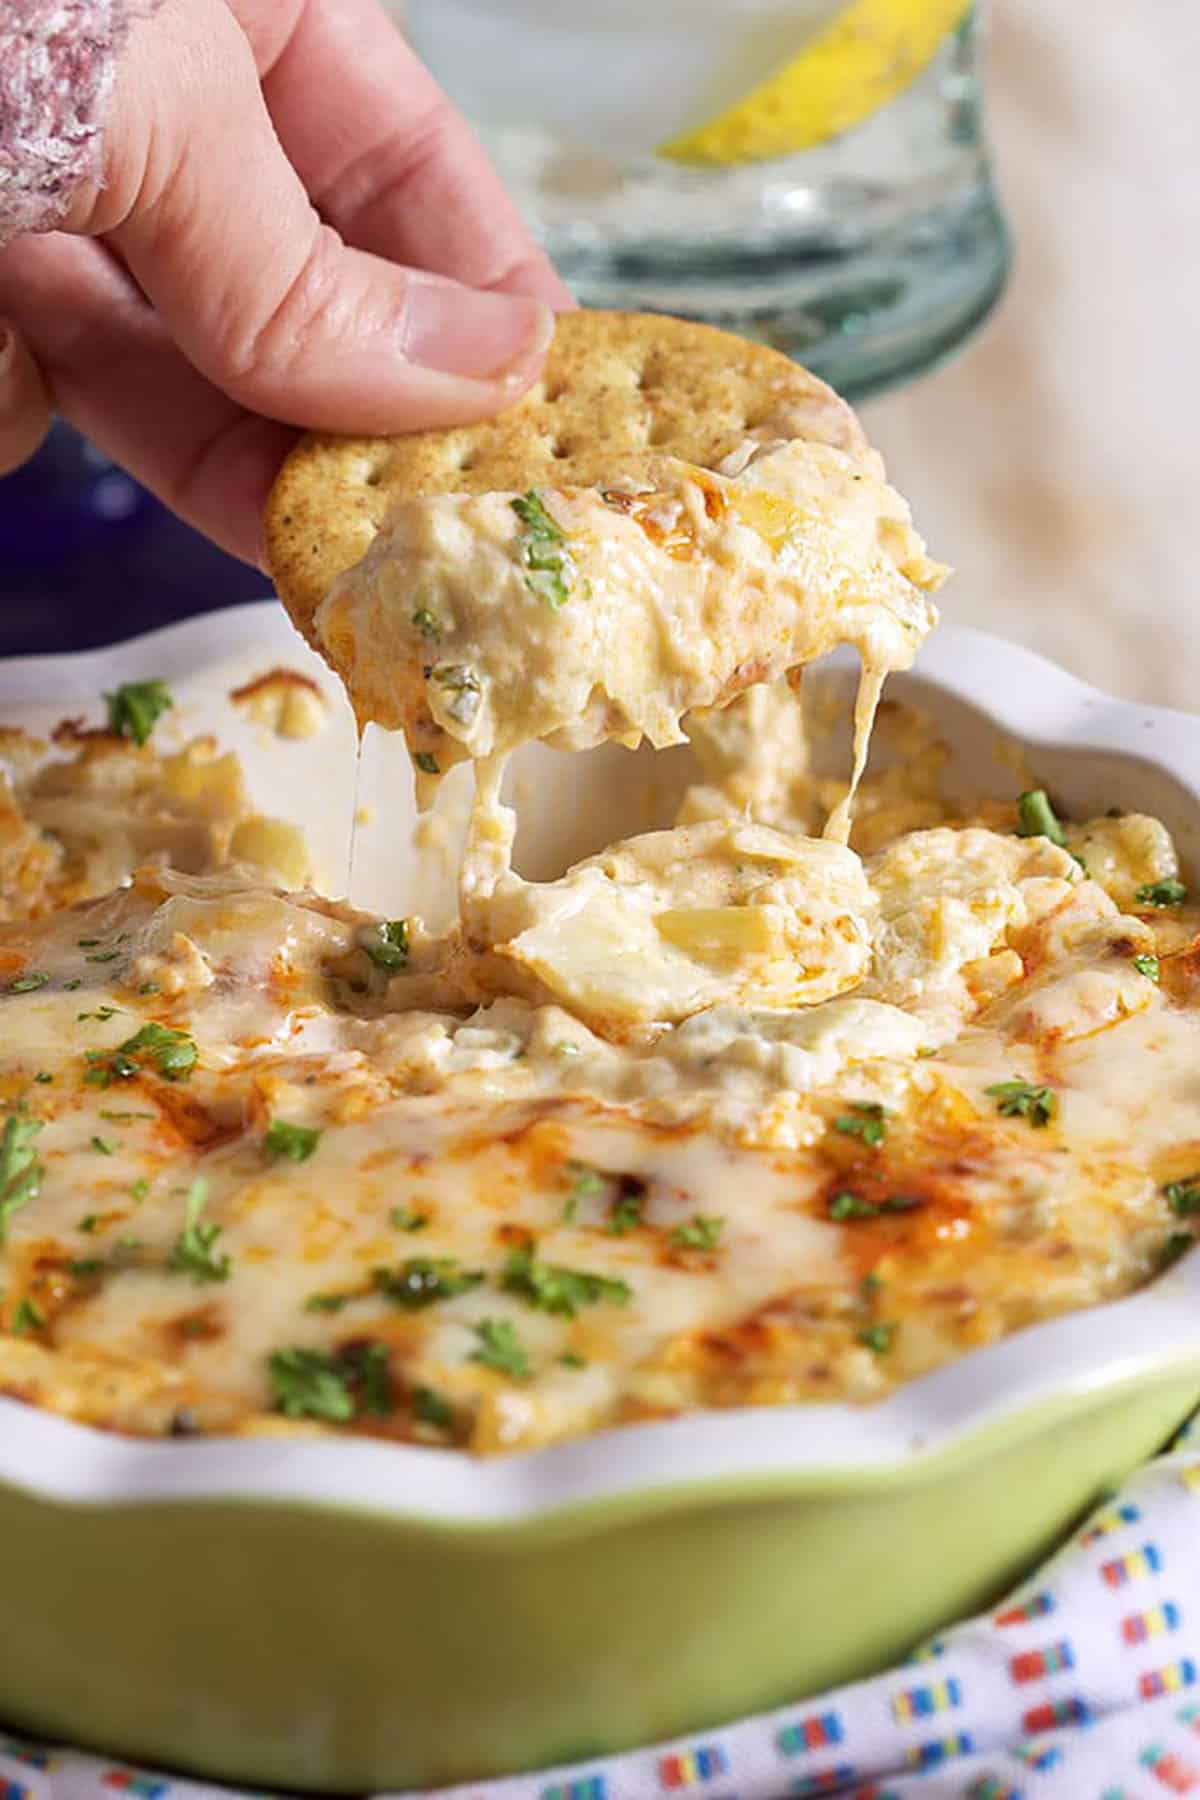 cracker with a cheese pull over a bowl of hot artichoke dip